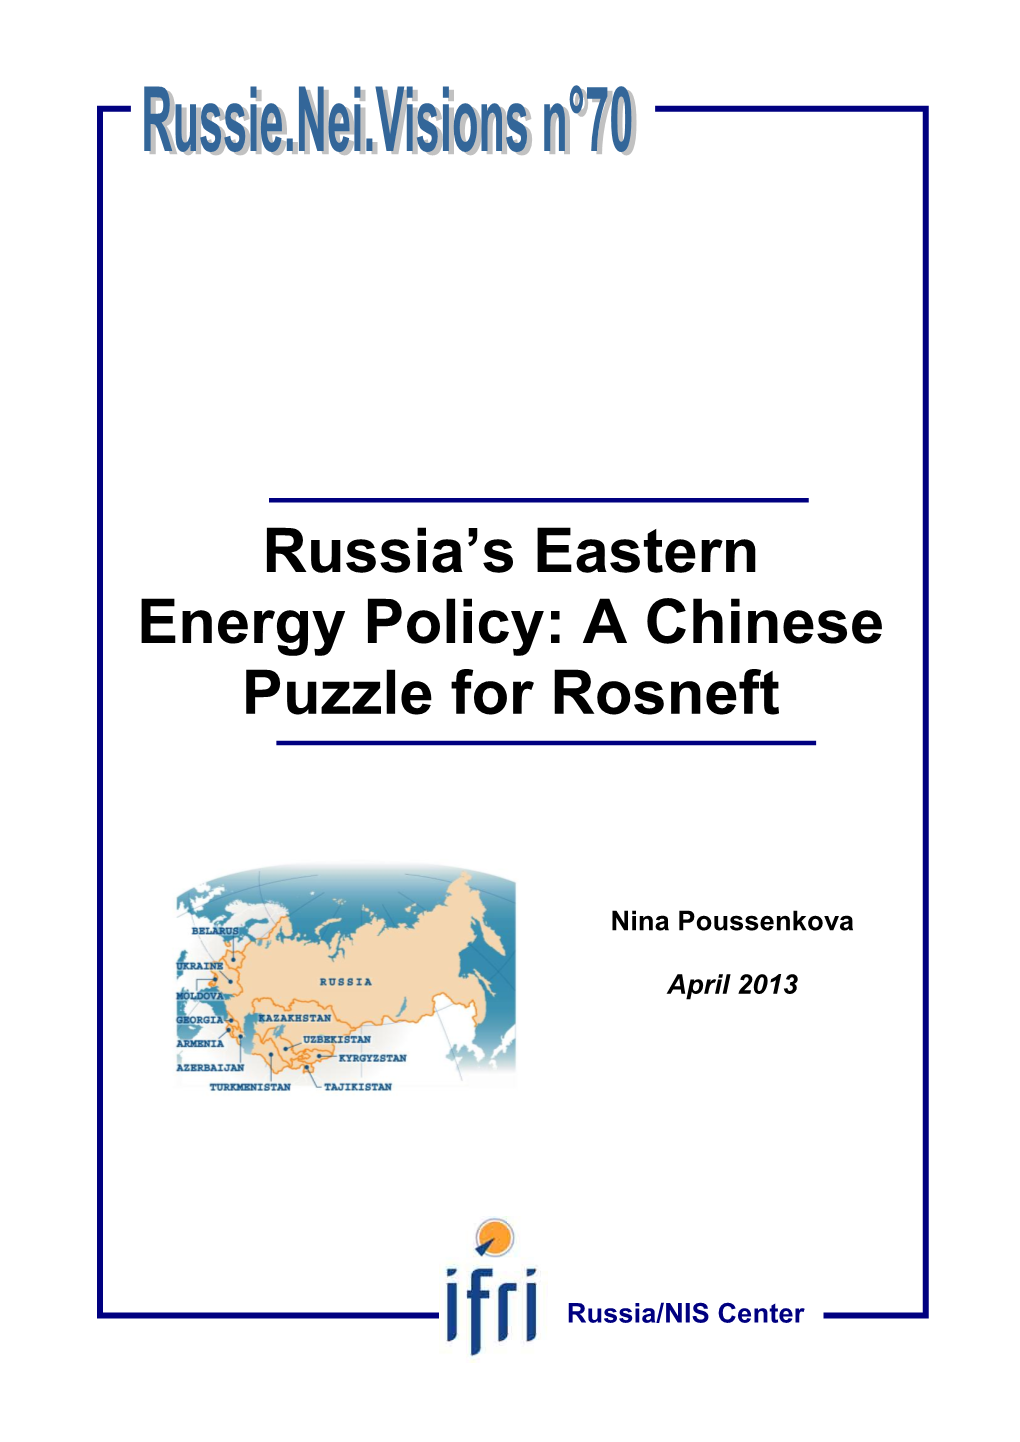 Russia's Eastern Energy Policy: a Chinese Puzzle for Rosneft